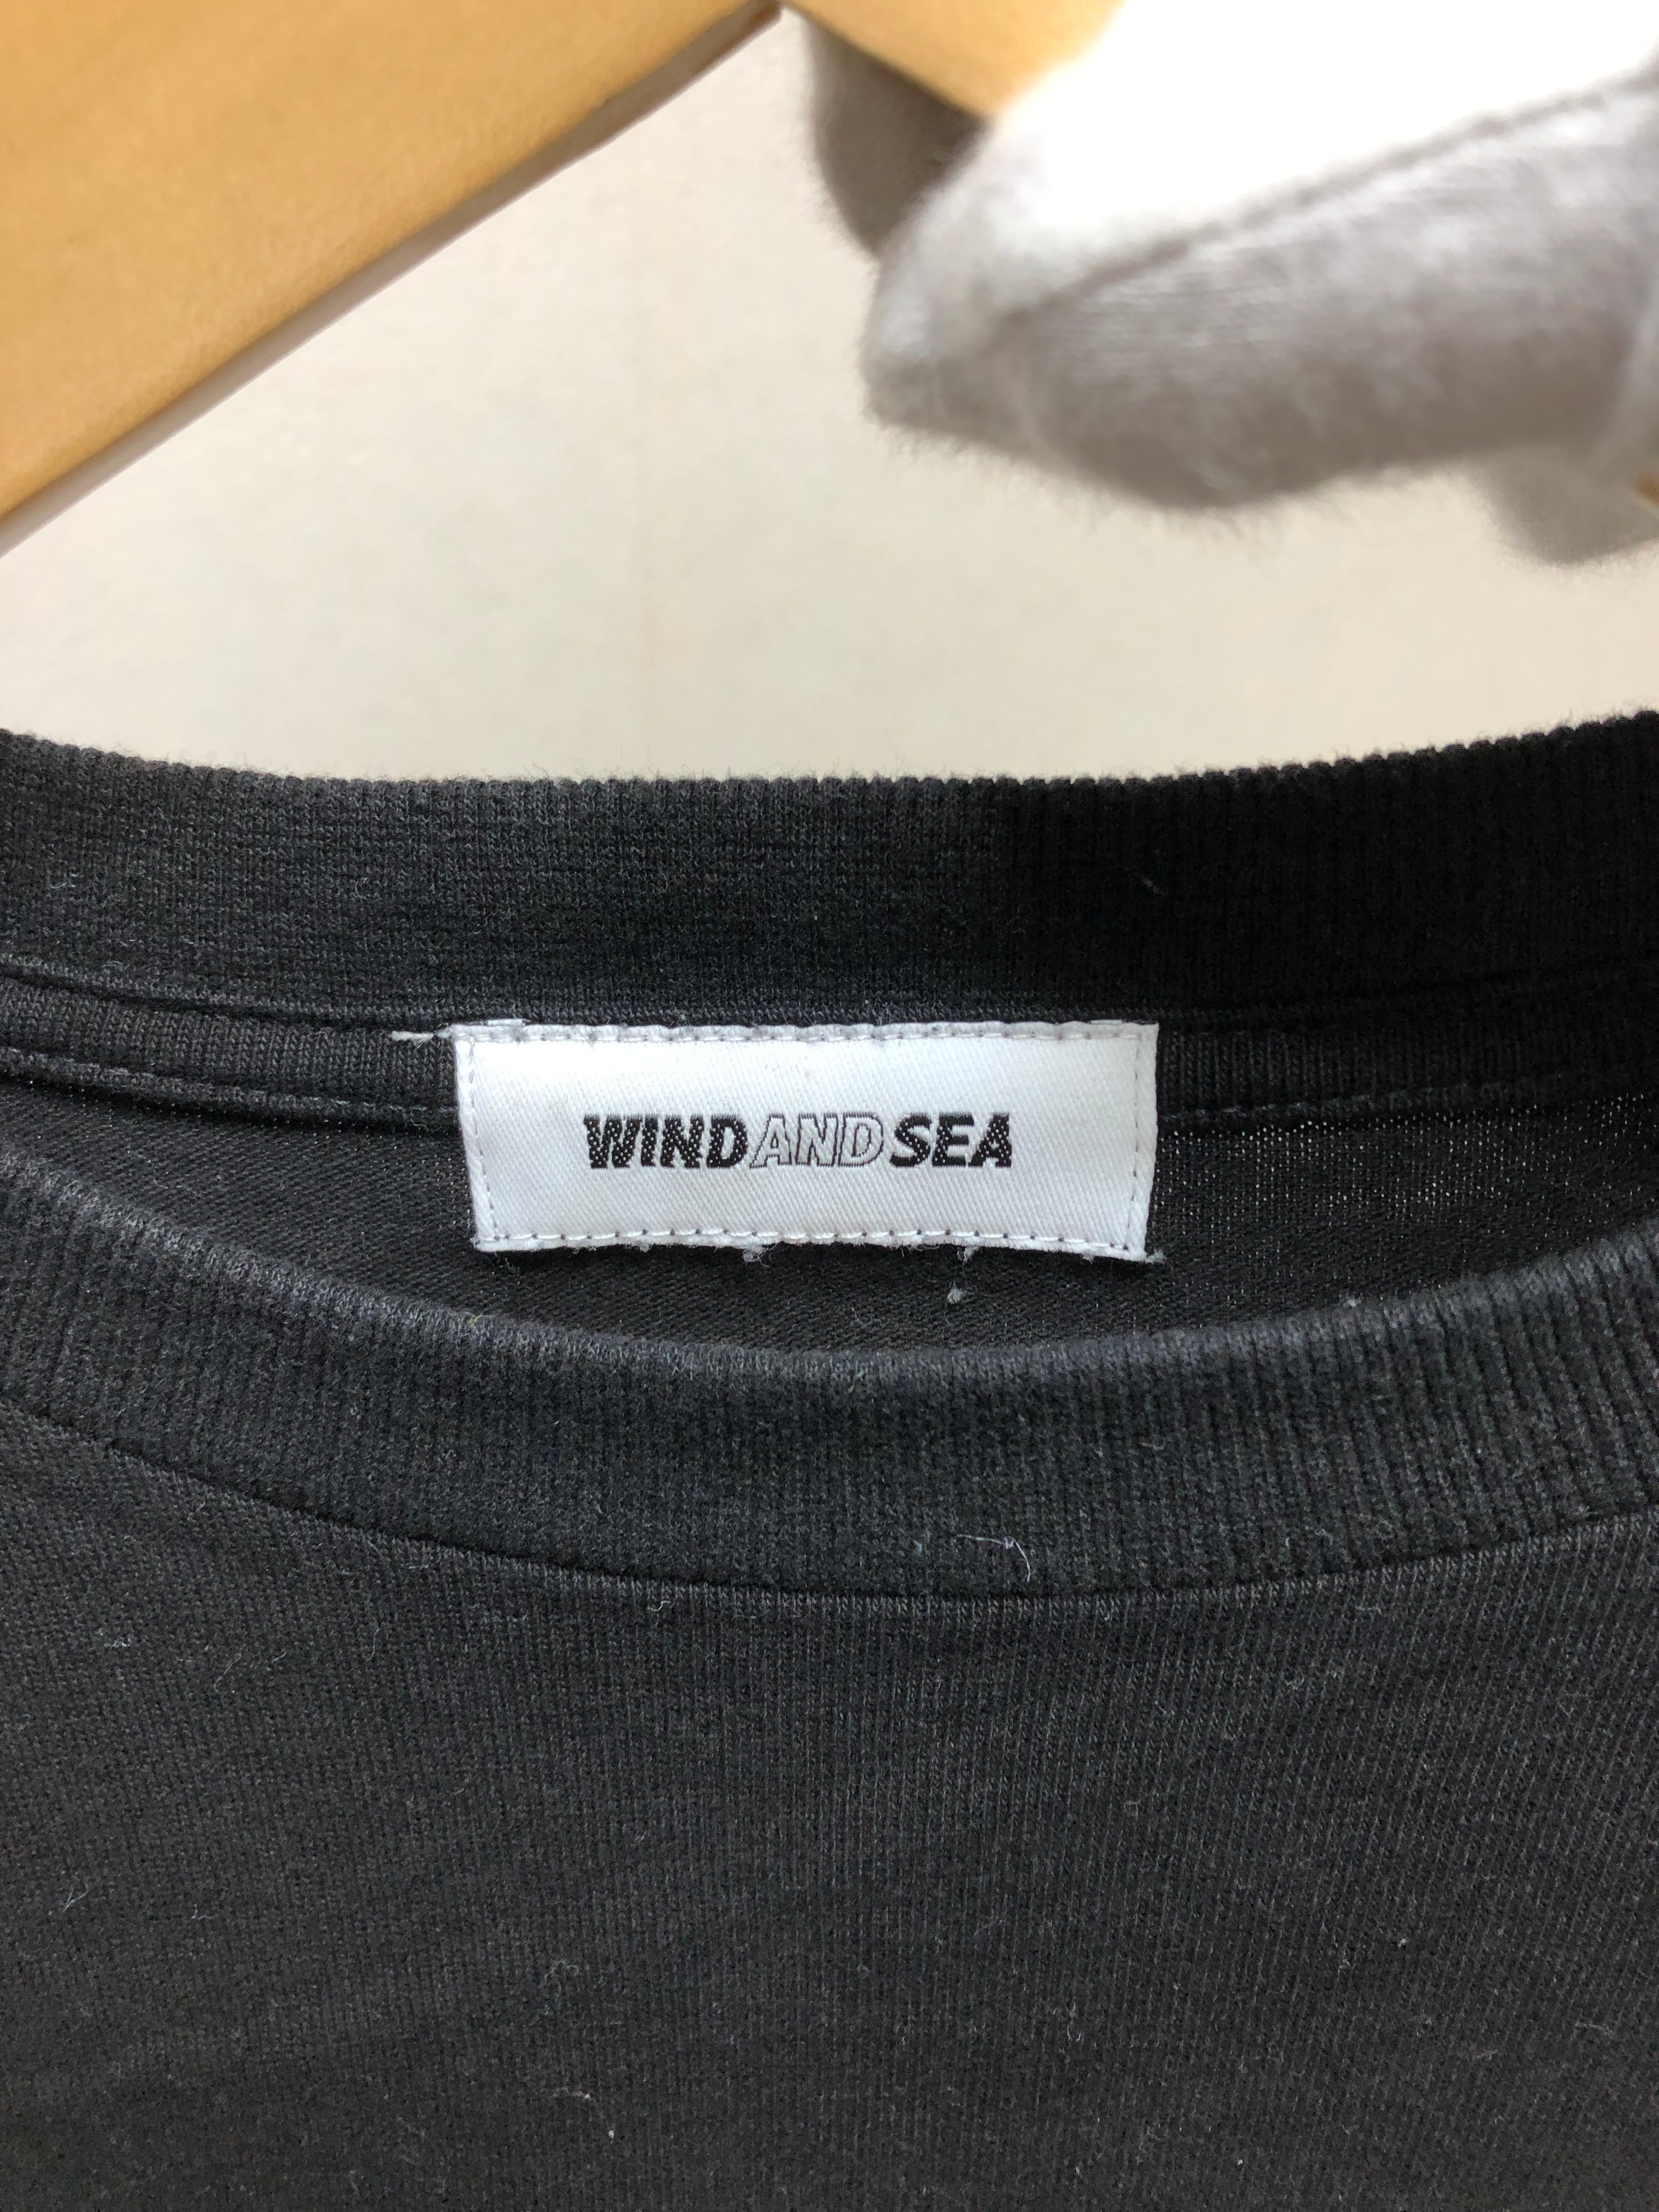 530342○ WIND AND SEA BEYOUTH ロンT L チェック ロゴ Tシャツ ウィン ...